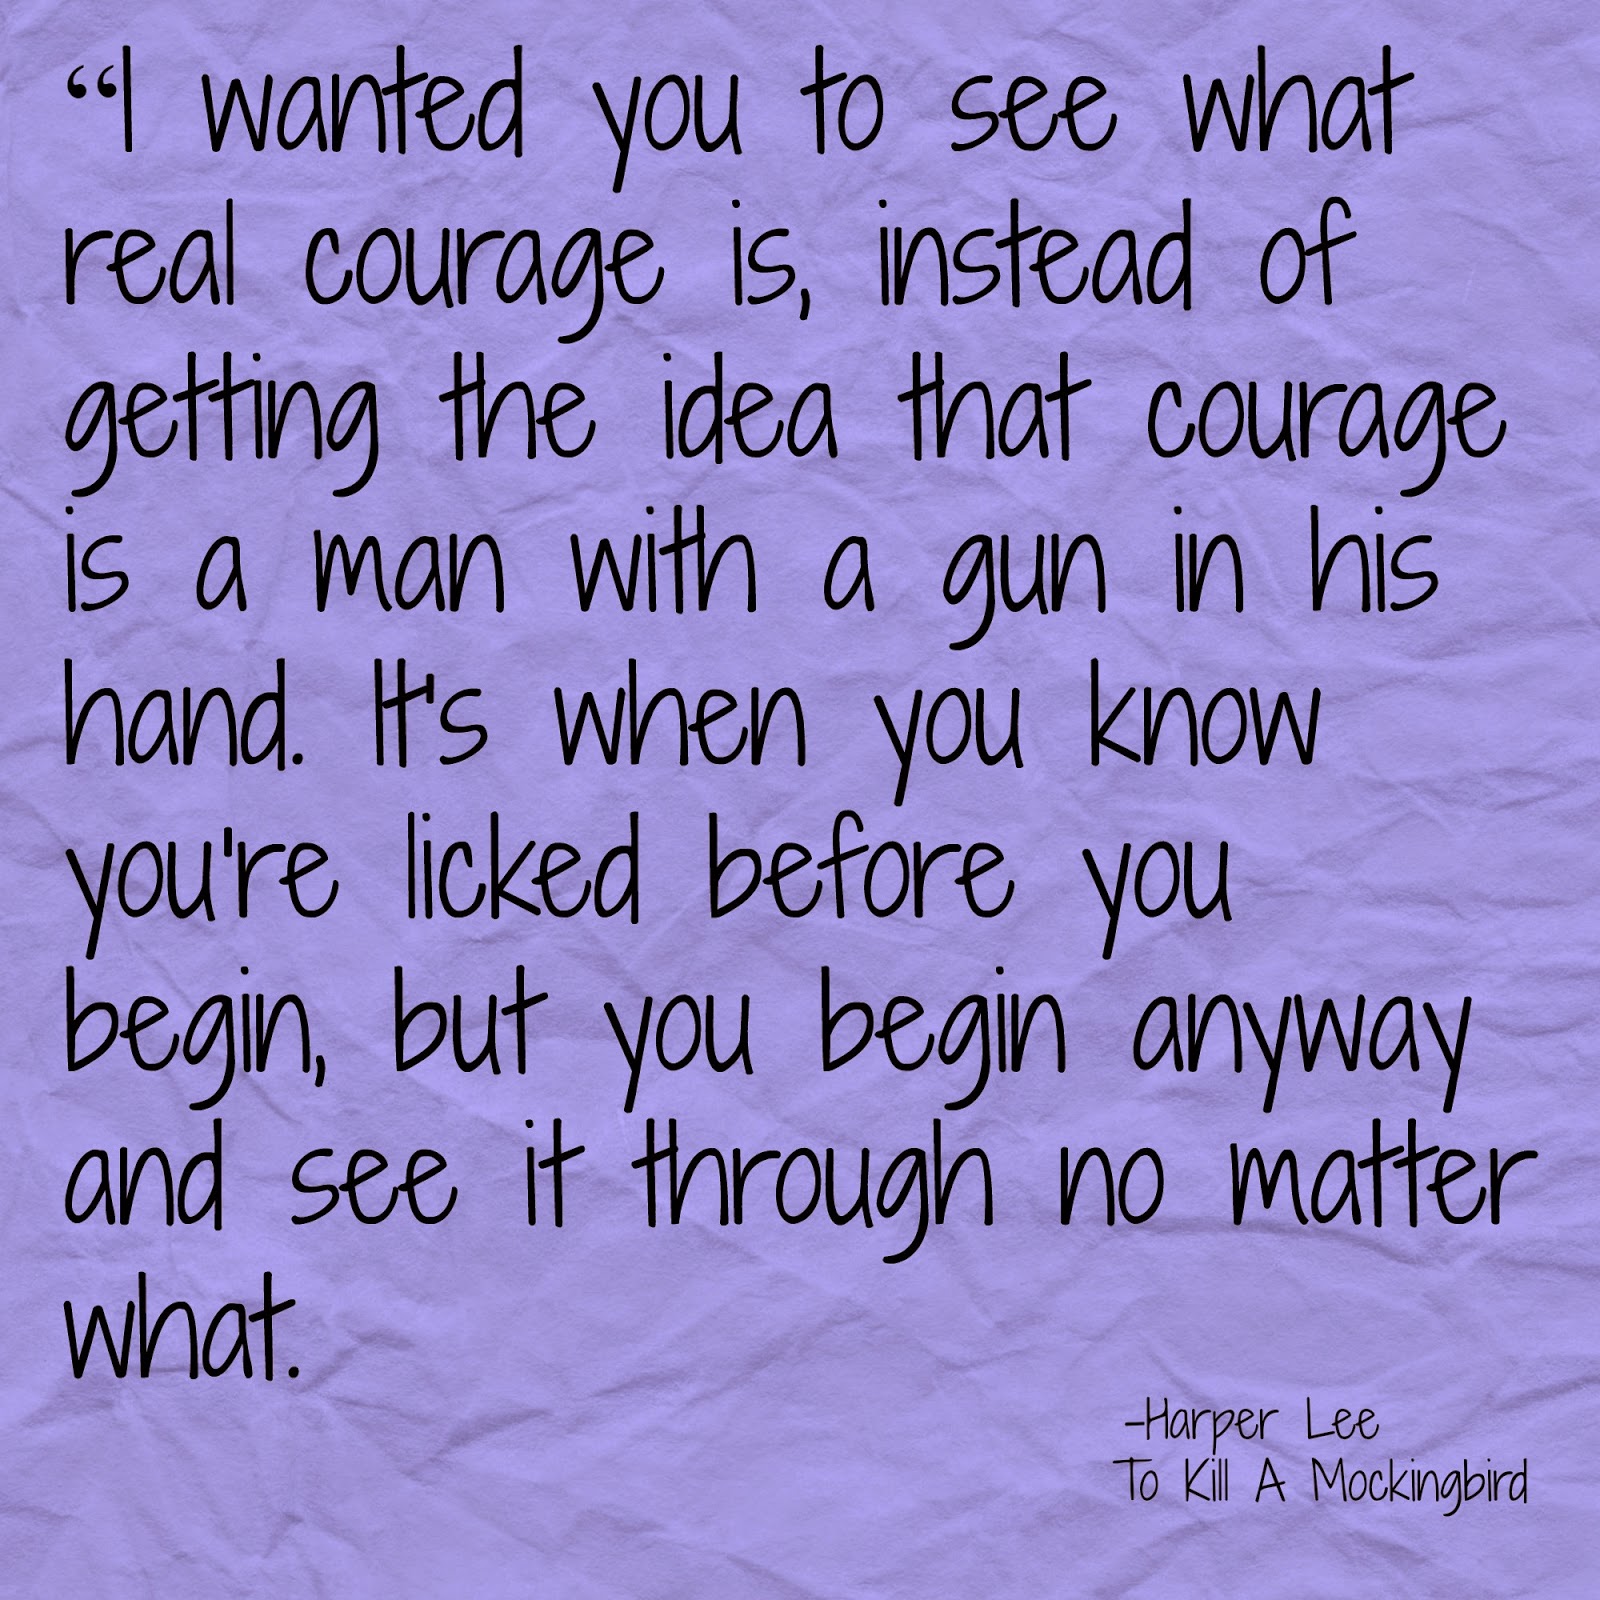 Real Courage quote from To Kill A Mockingbird by Harper Lee